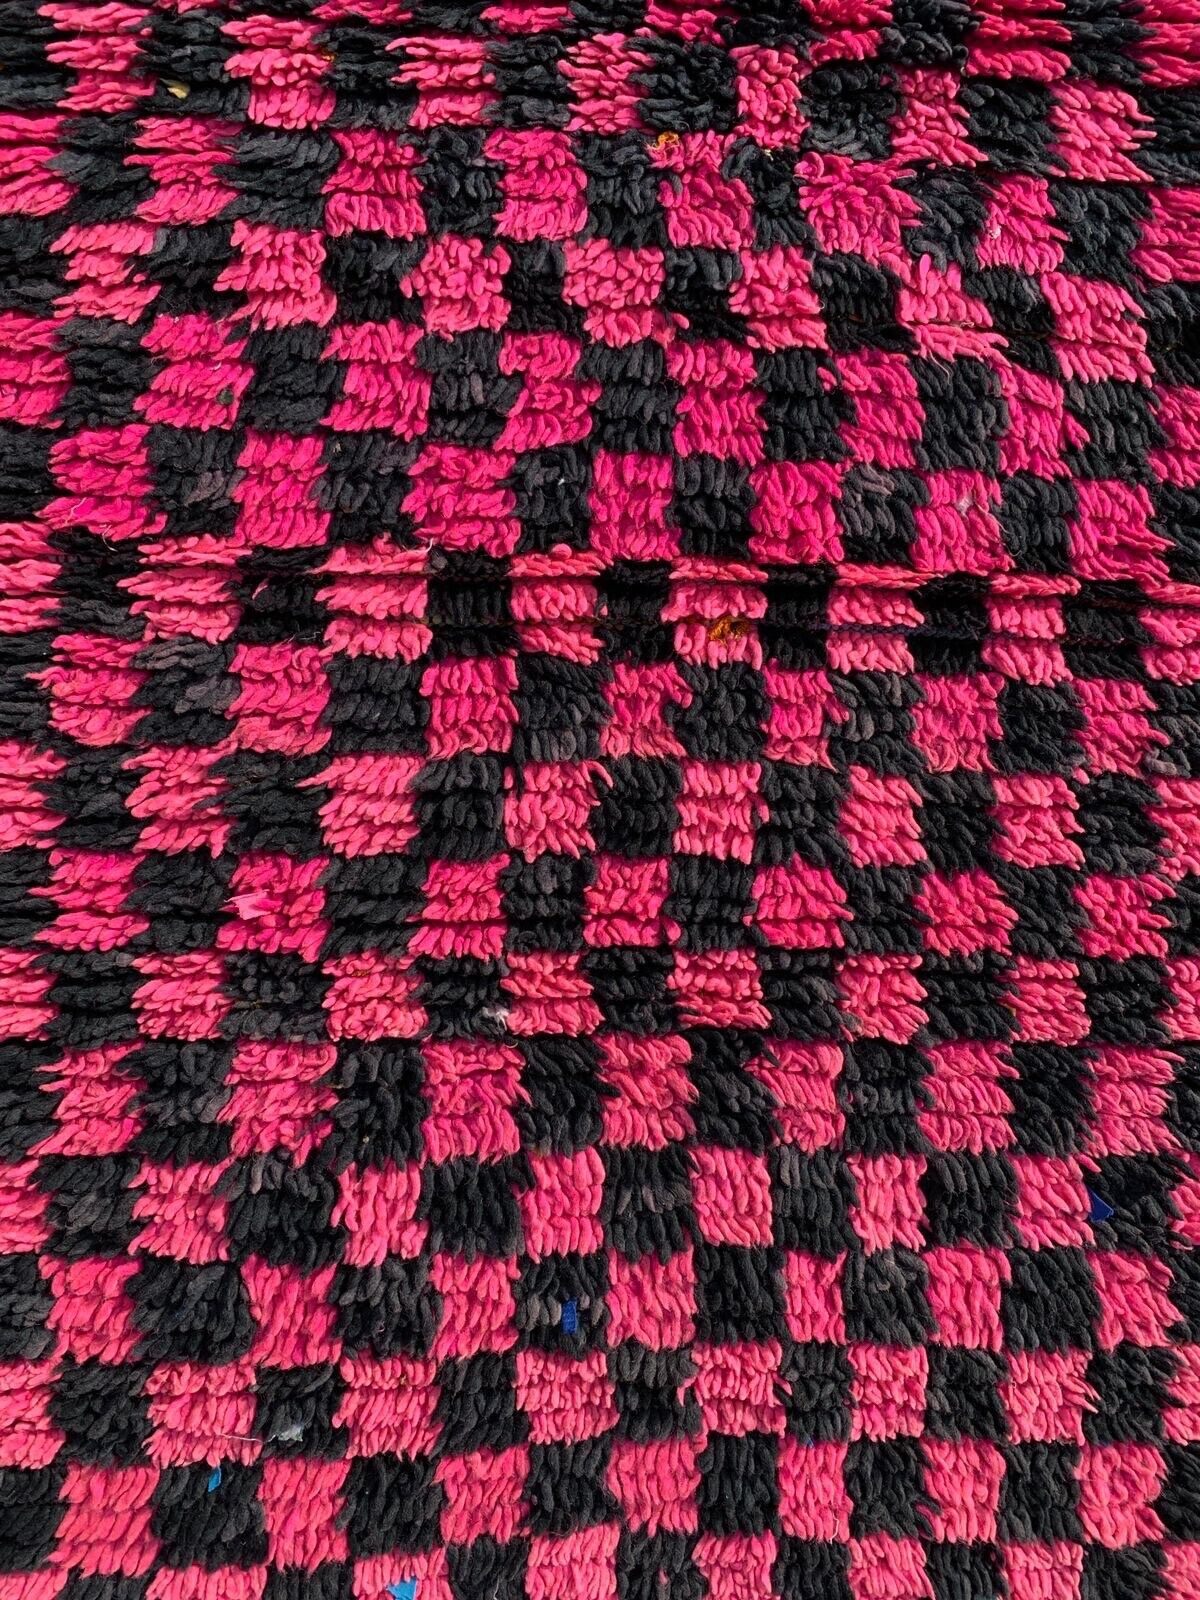 Close-up of the striking contrast between the bold black and fuchsia squares